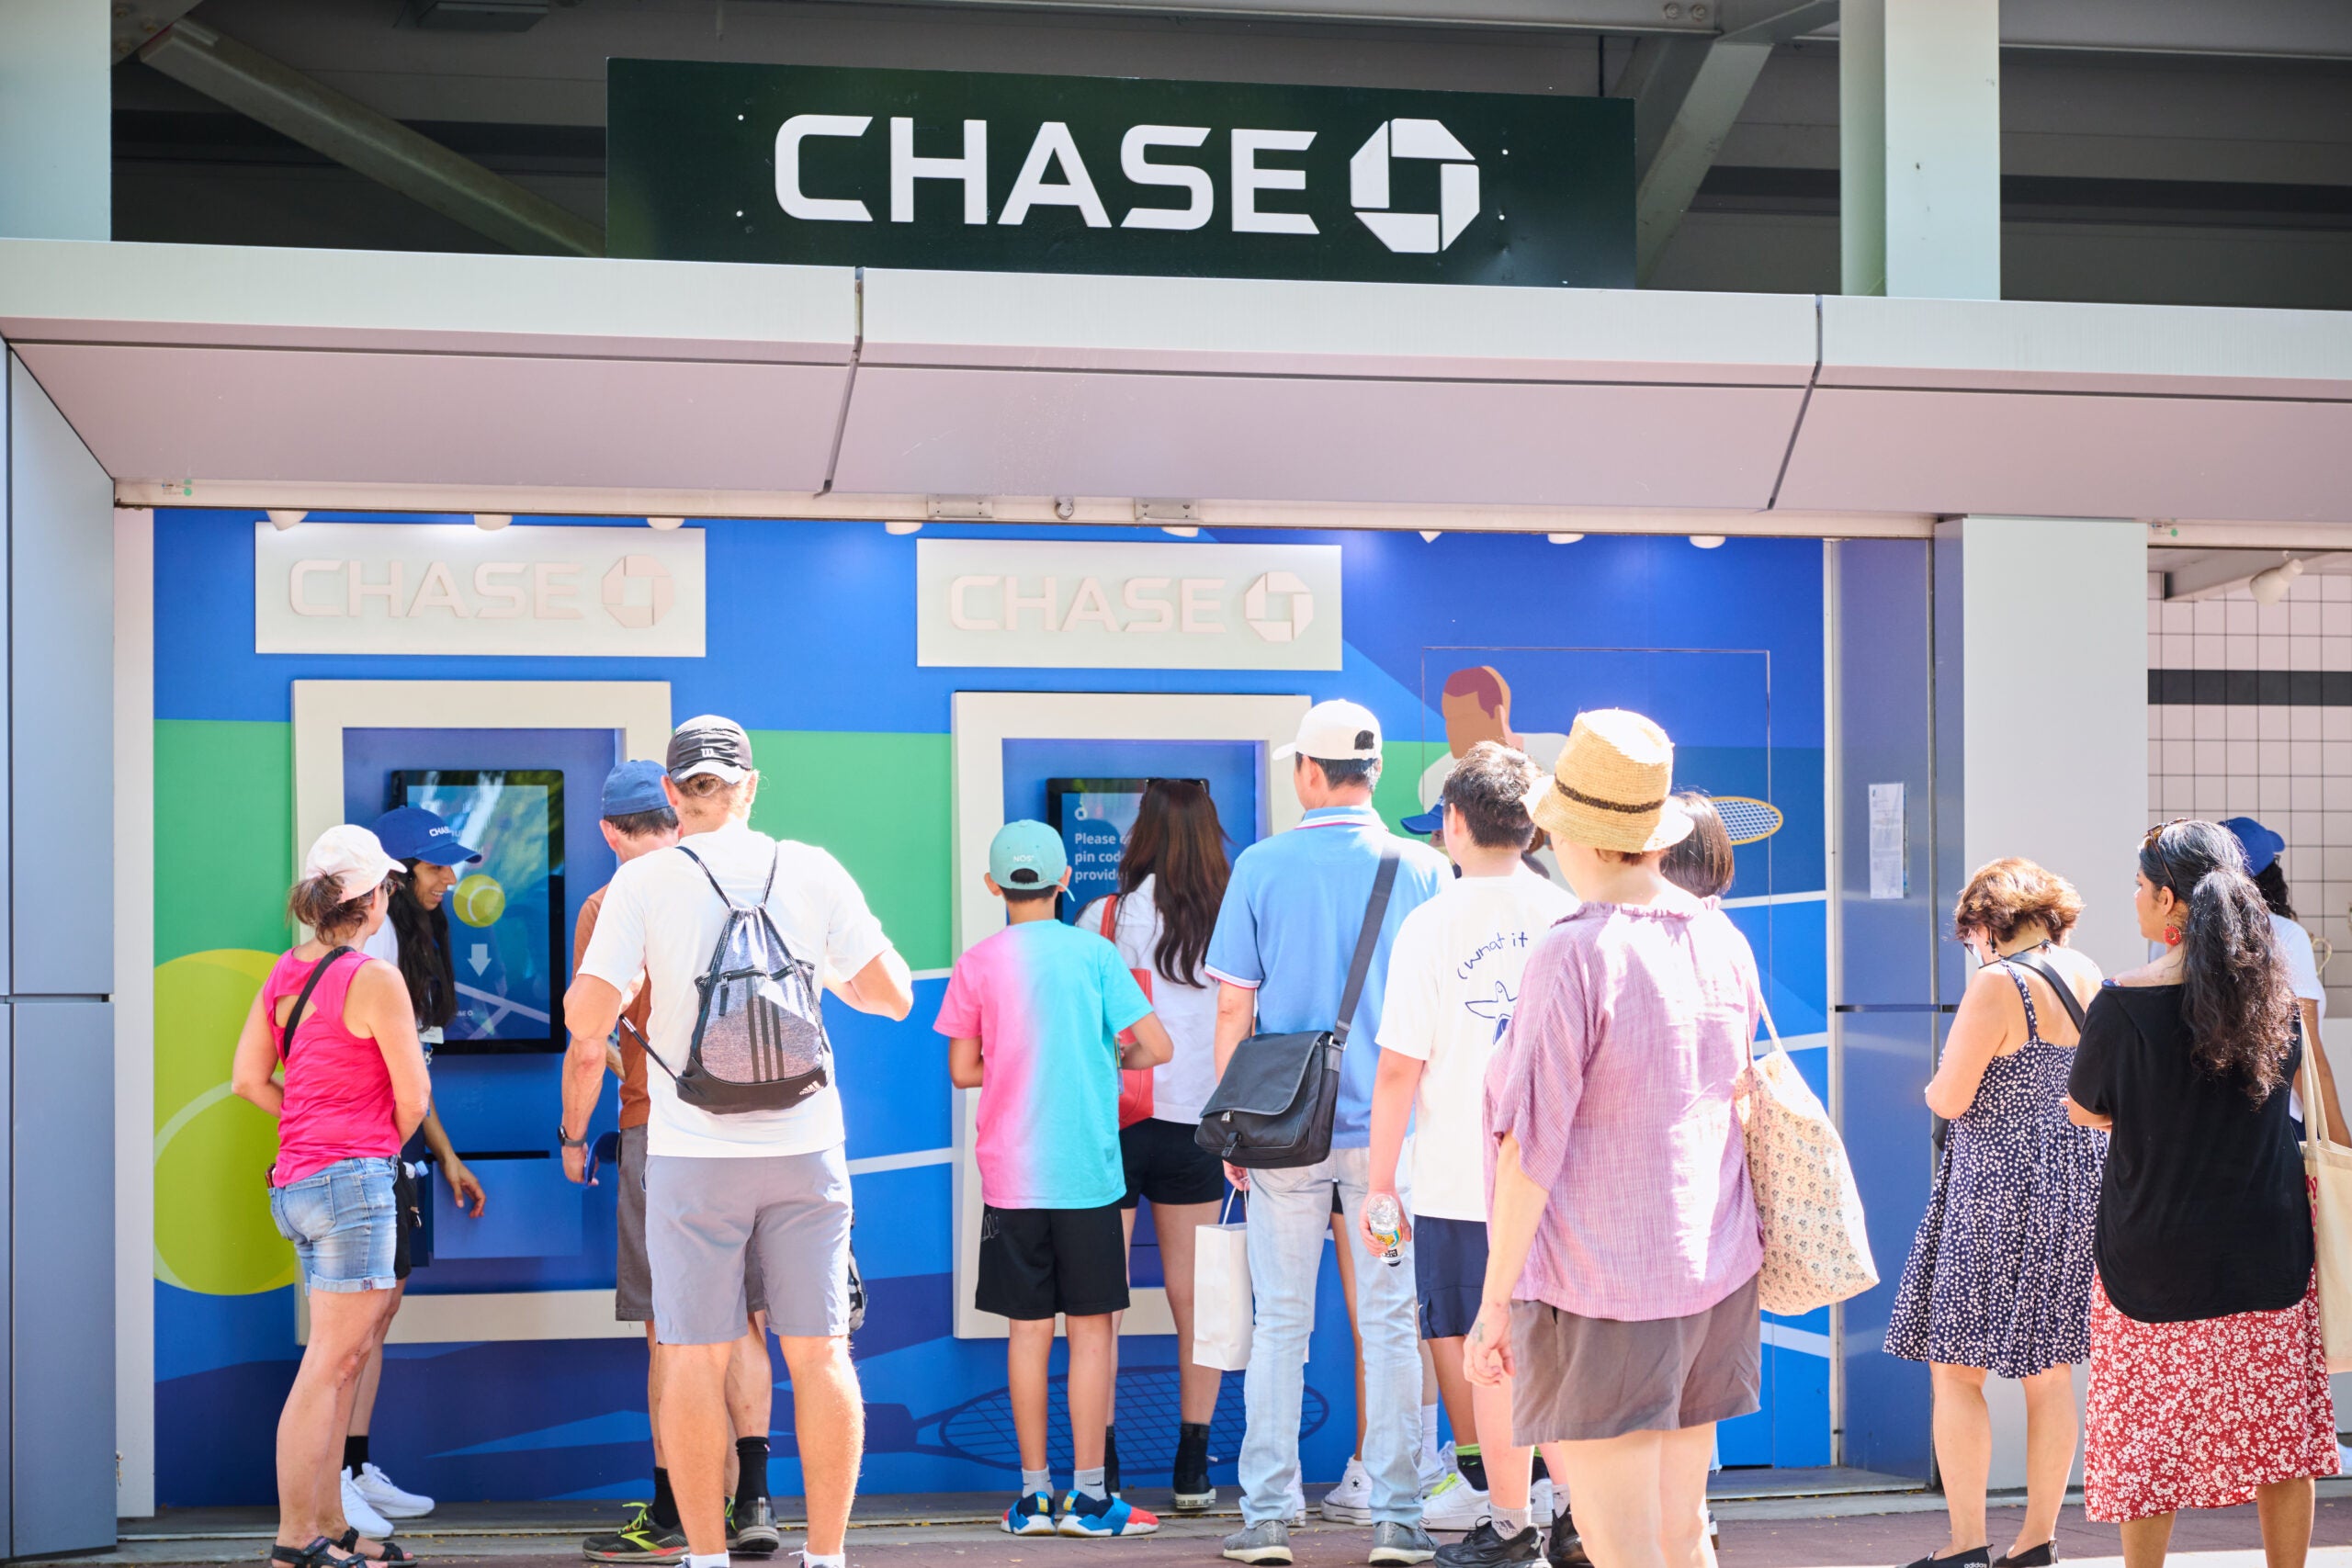 Chase quietly opened reservations for its lounge at the US Open, but